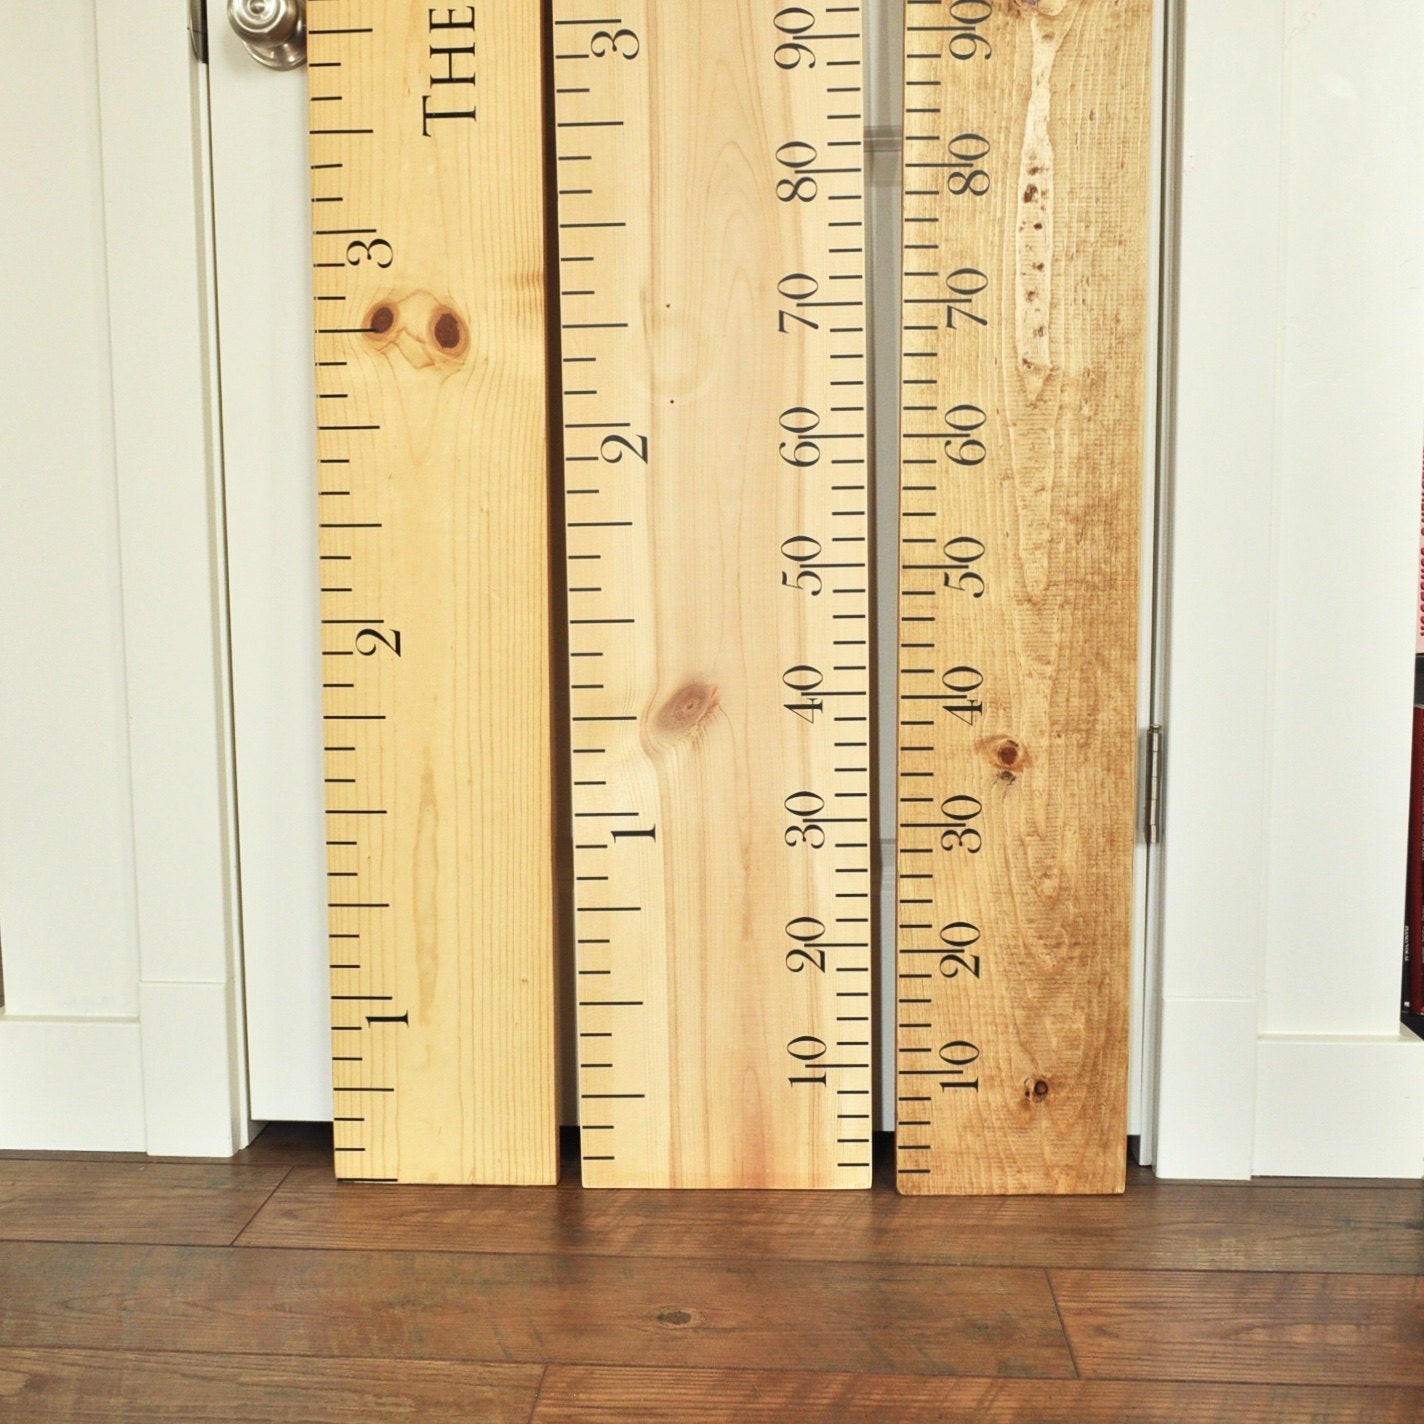 DIY Wood Growth Chart
 Ruler Growth Chart Kit DIY Project Oversized Wood Ruler